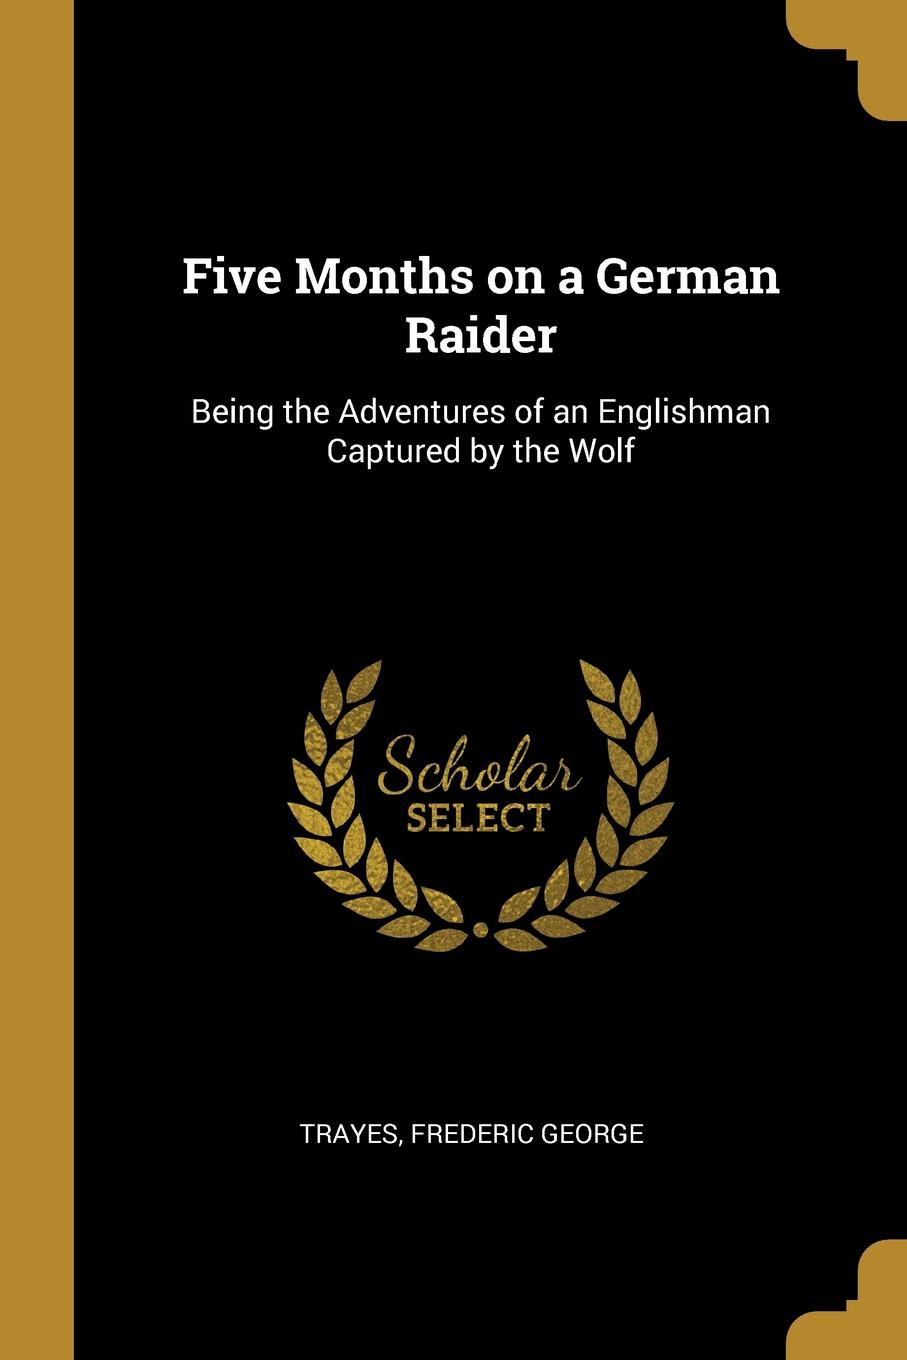 Five Months on a German Raider. Being the Adventures of an Englishman Captured by the Wolf